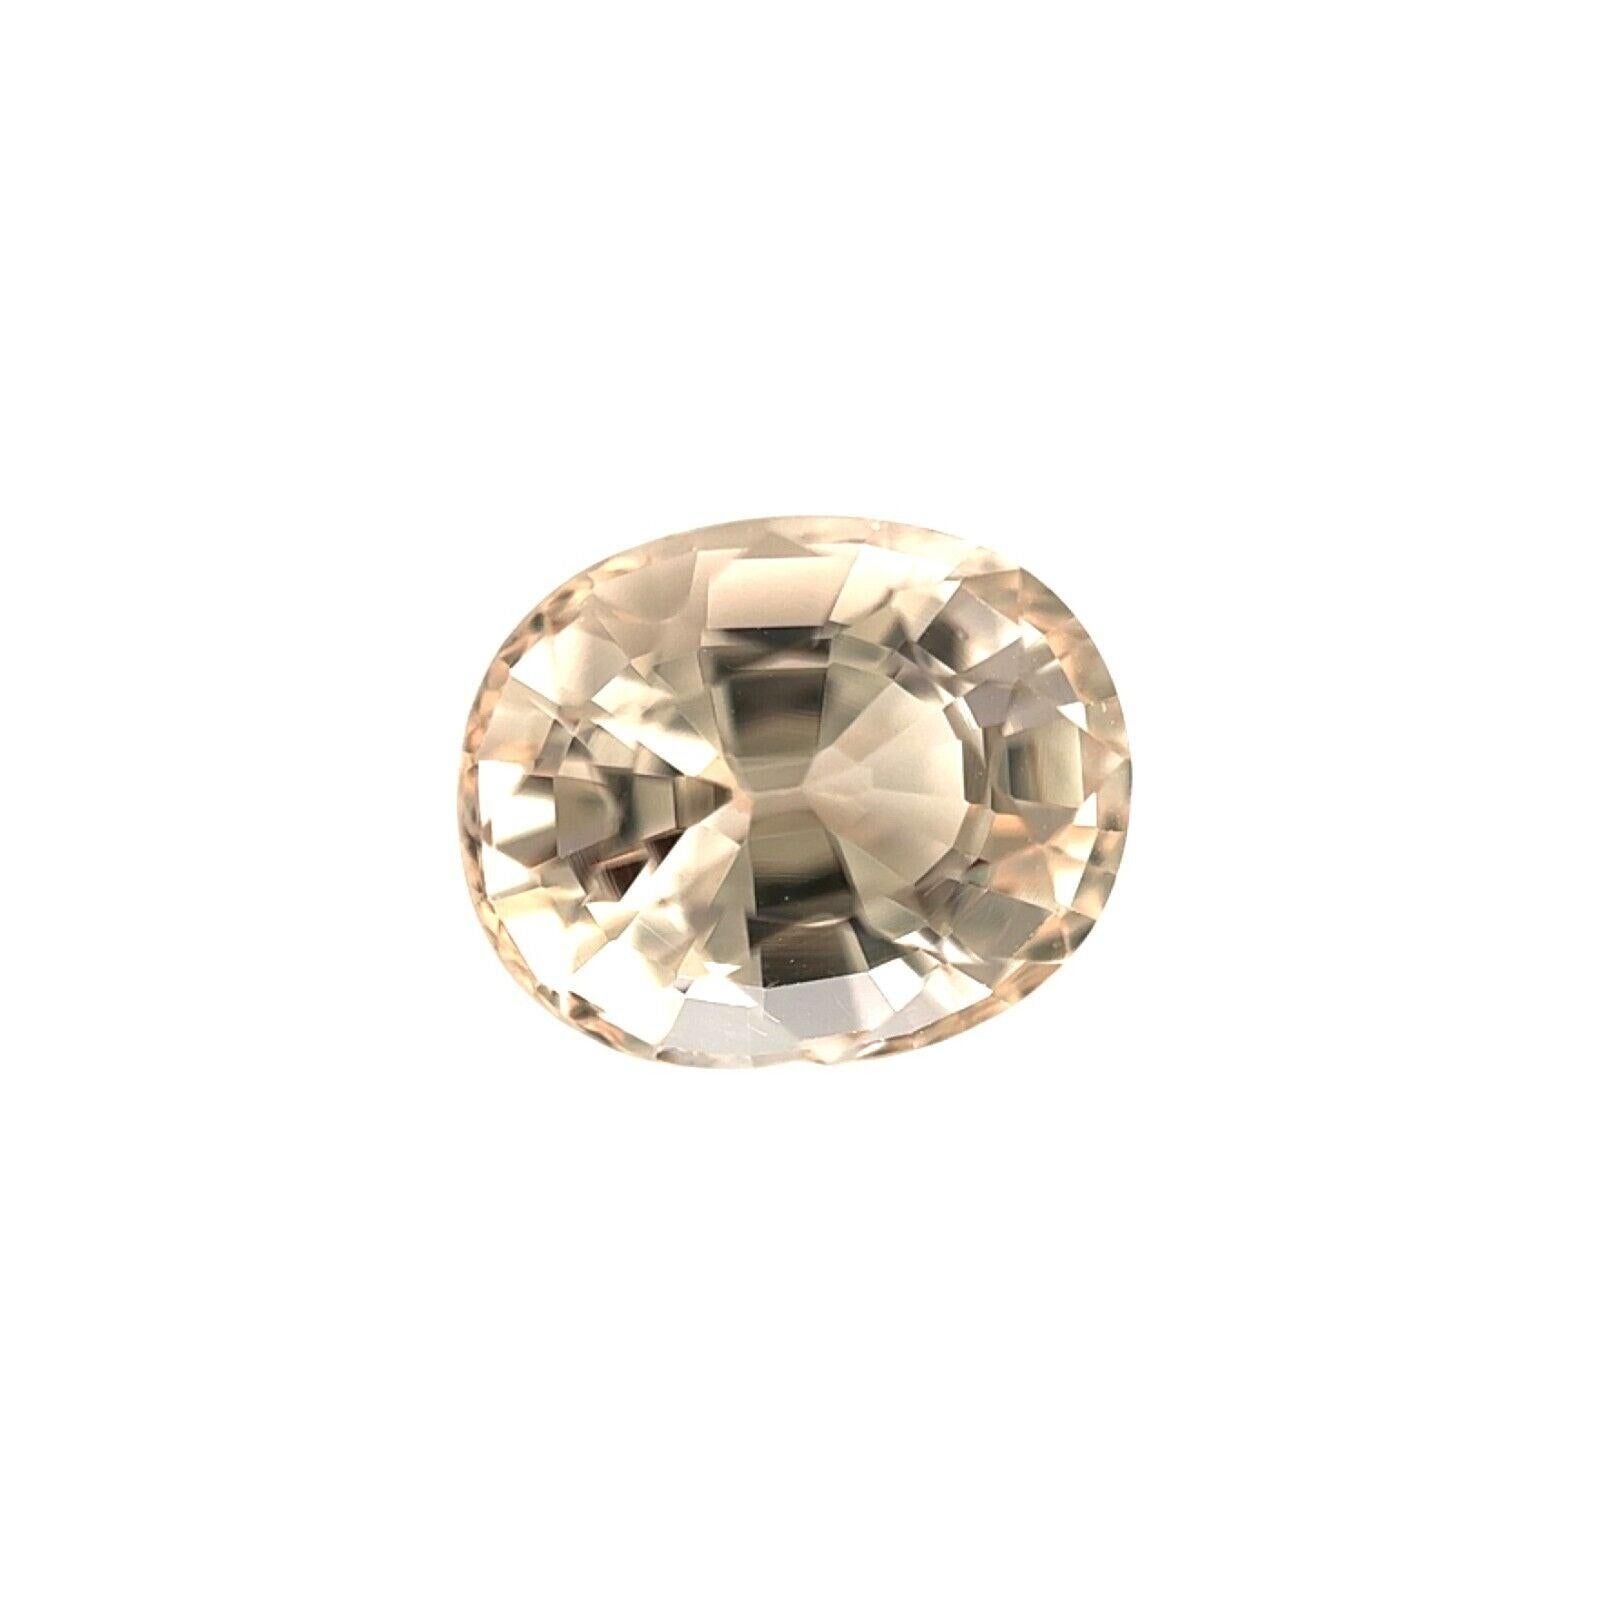 Natural Fine Morganite 2.45ct Peach Orange Pink Beryl Oval Cut 9x7.4mm Gem VVS

Fine Natural Morganite Gemstone.
2.45 Carat with a beautiful pink orange peach colour and excellent clarity. Very clean stone, VVS.
Also has an excellent oval cut with